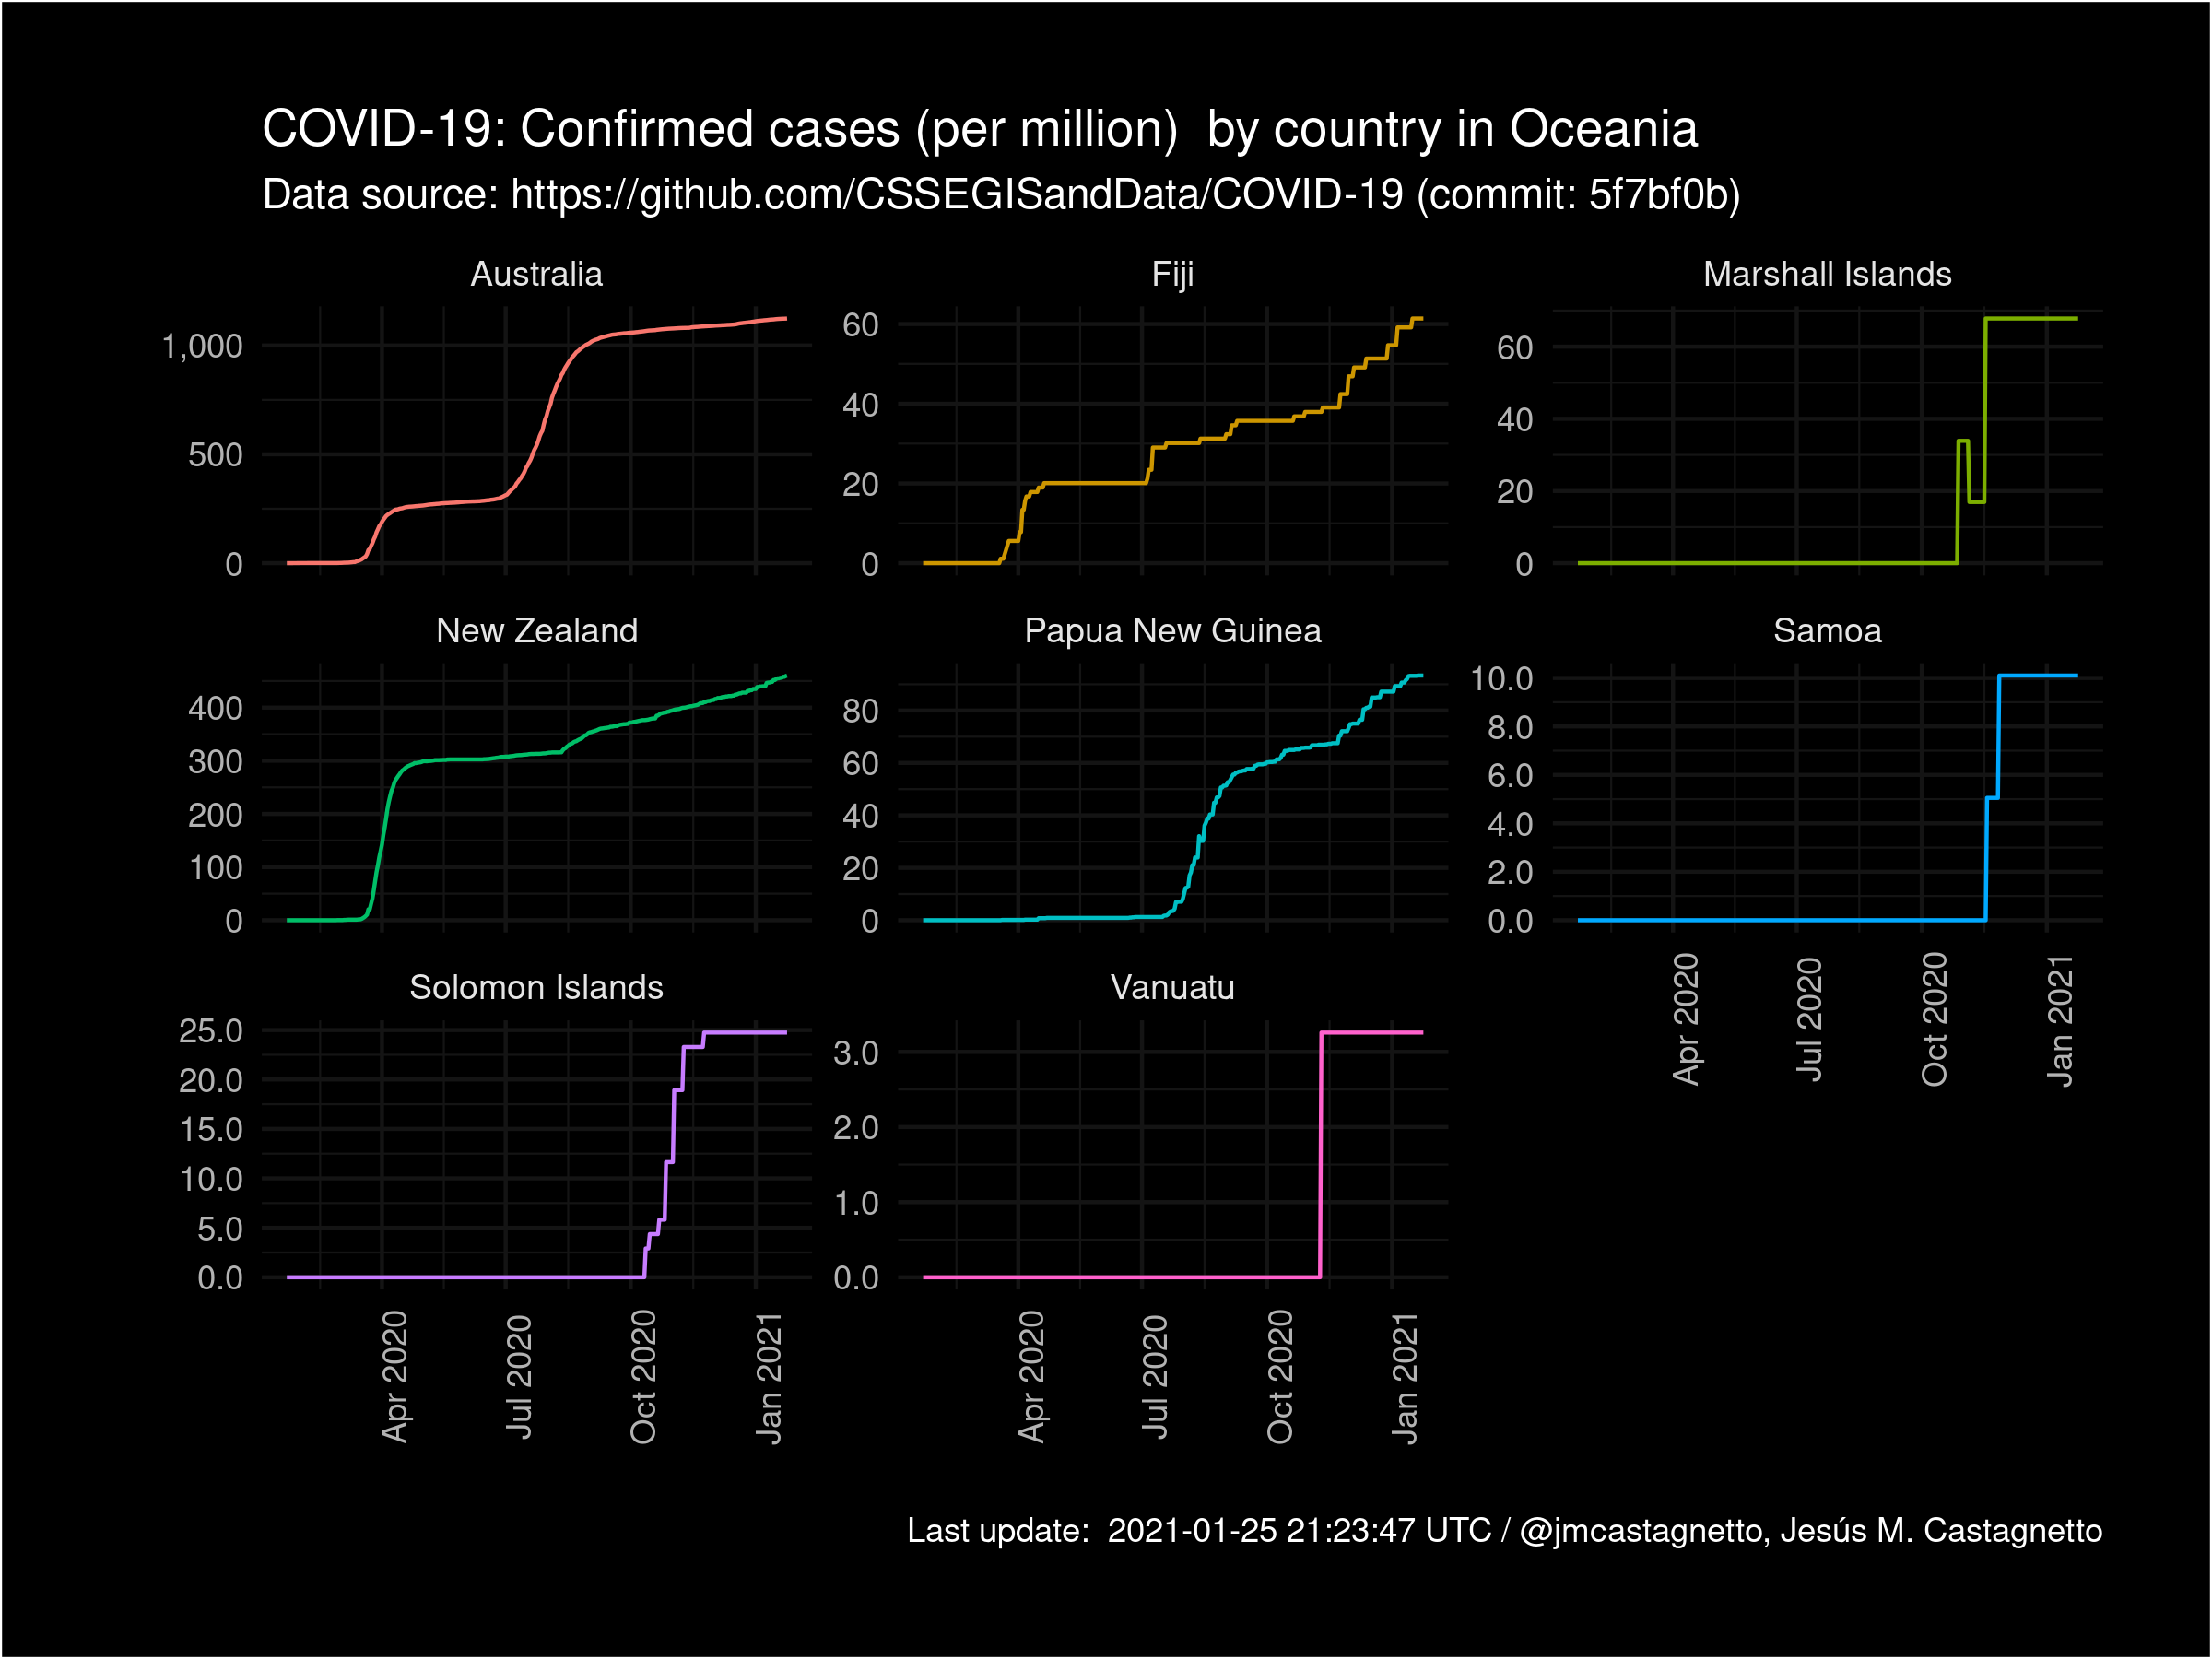 COVID-19 Confirmed cases by country per million (Oceania)